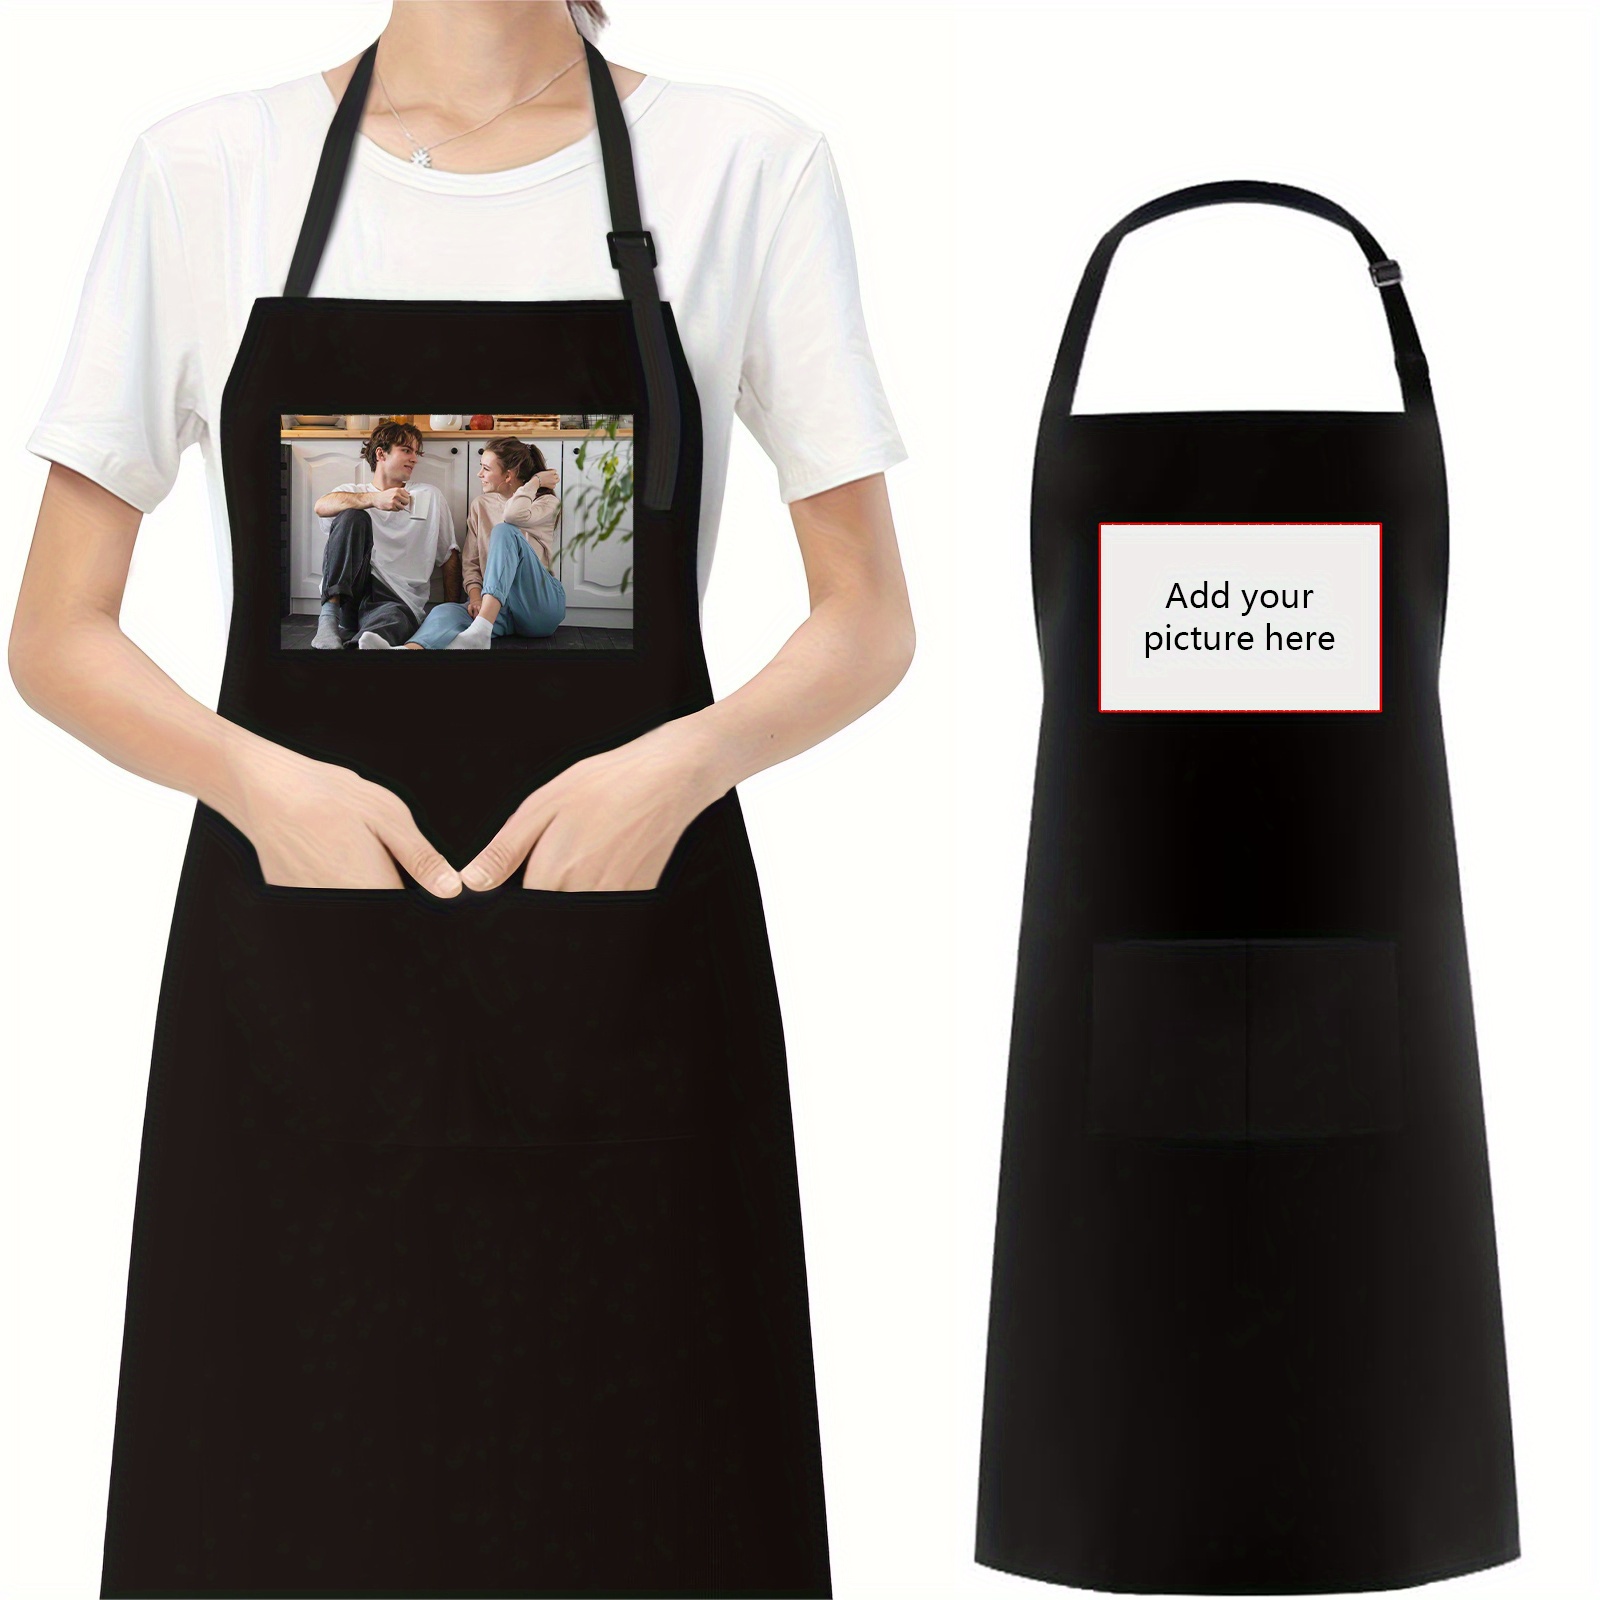 

Personalized Polyester Apron With 2 Large Pockets - Customizable With Logo Or Photo, Waterproof, Adjustable Tie, Unisex For Cooking, Bbq, Baking - 1pc